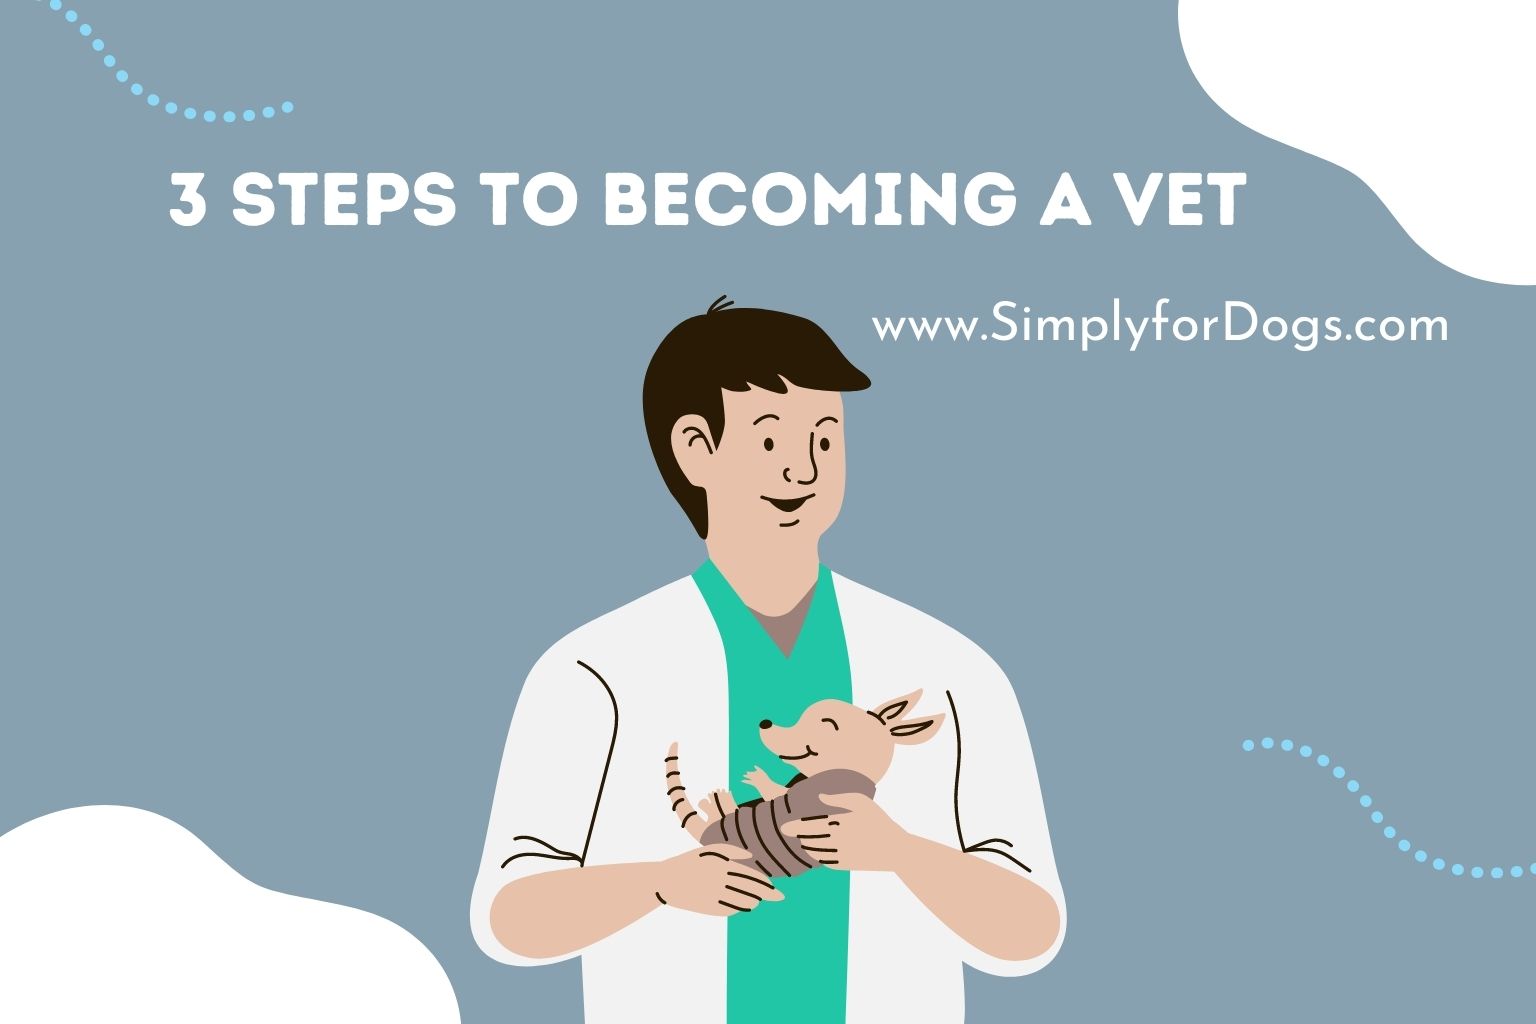 3 Steps to Becoming a Vet